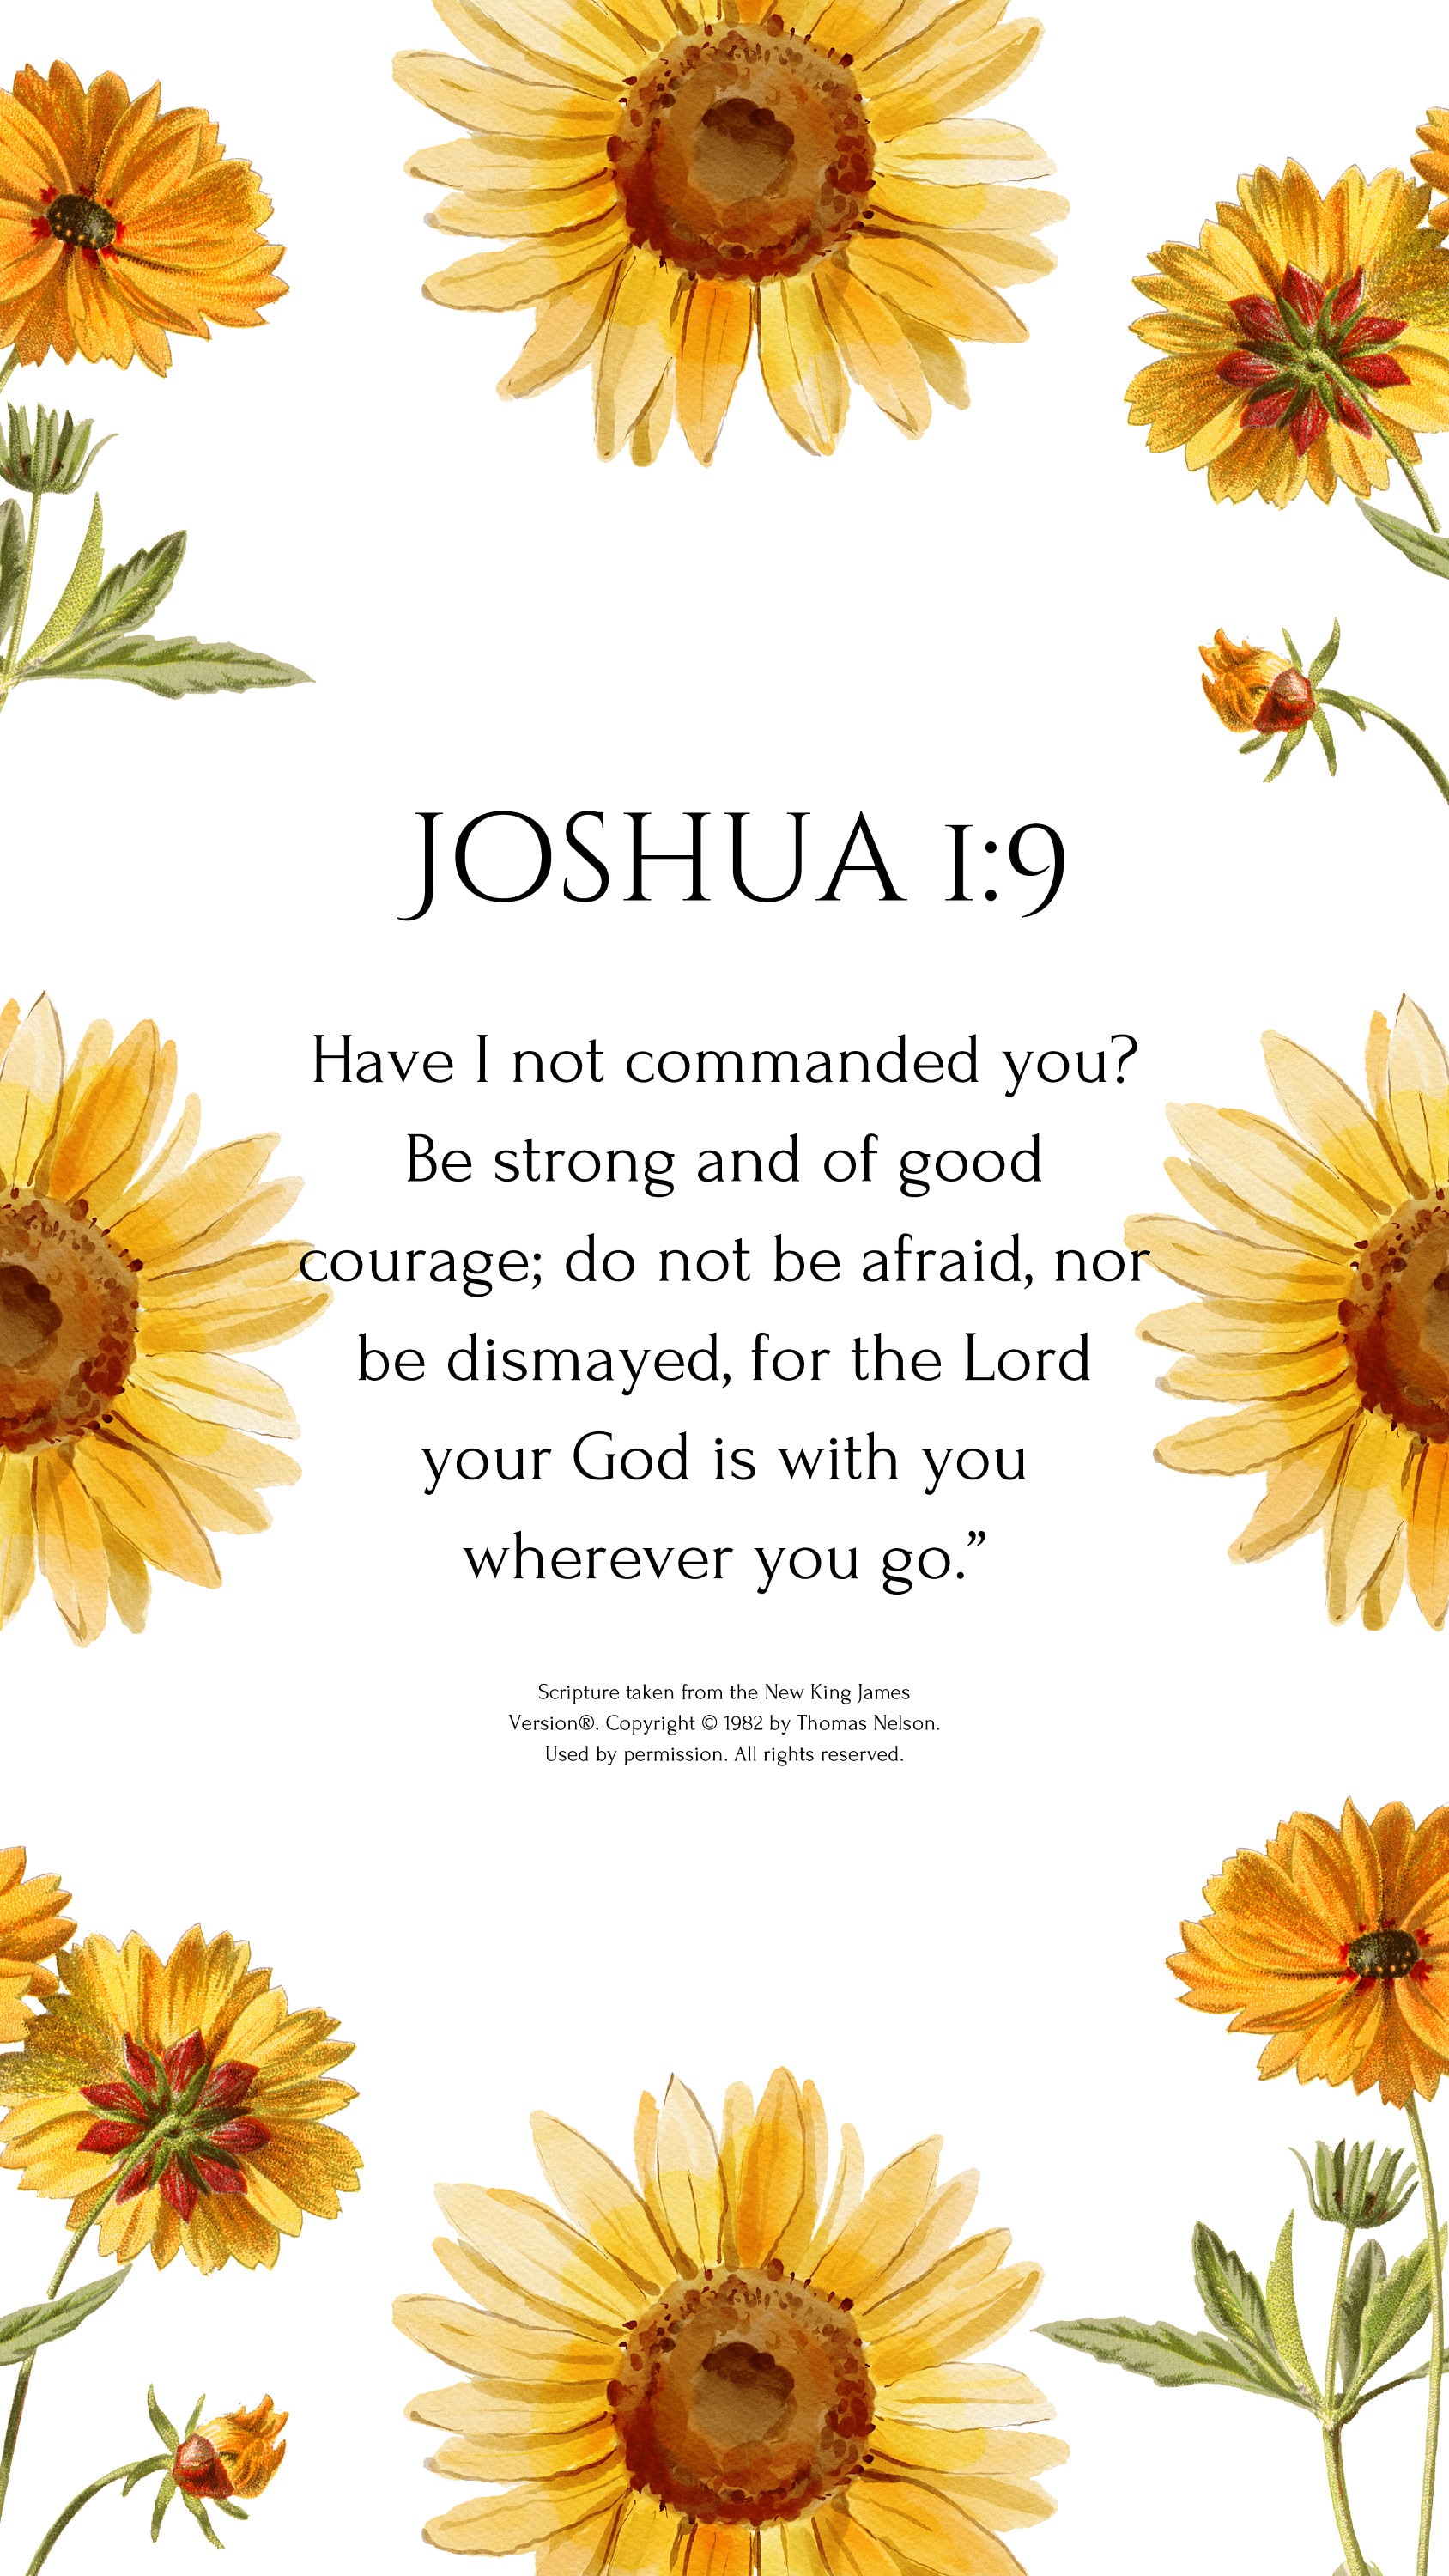 Joshua 19 bible verse with flowers - Christian iPhone